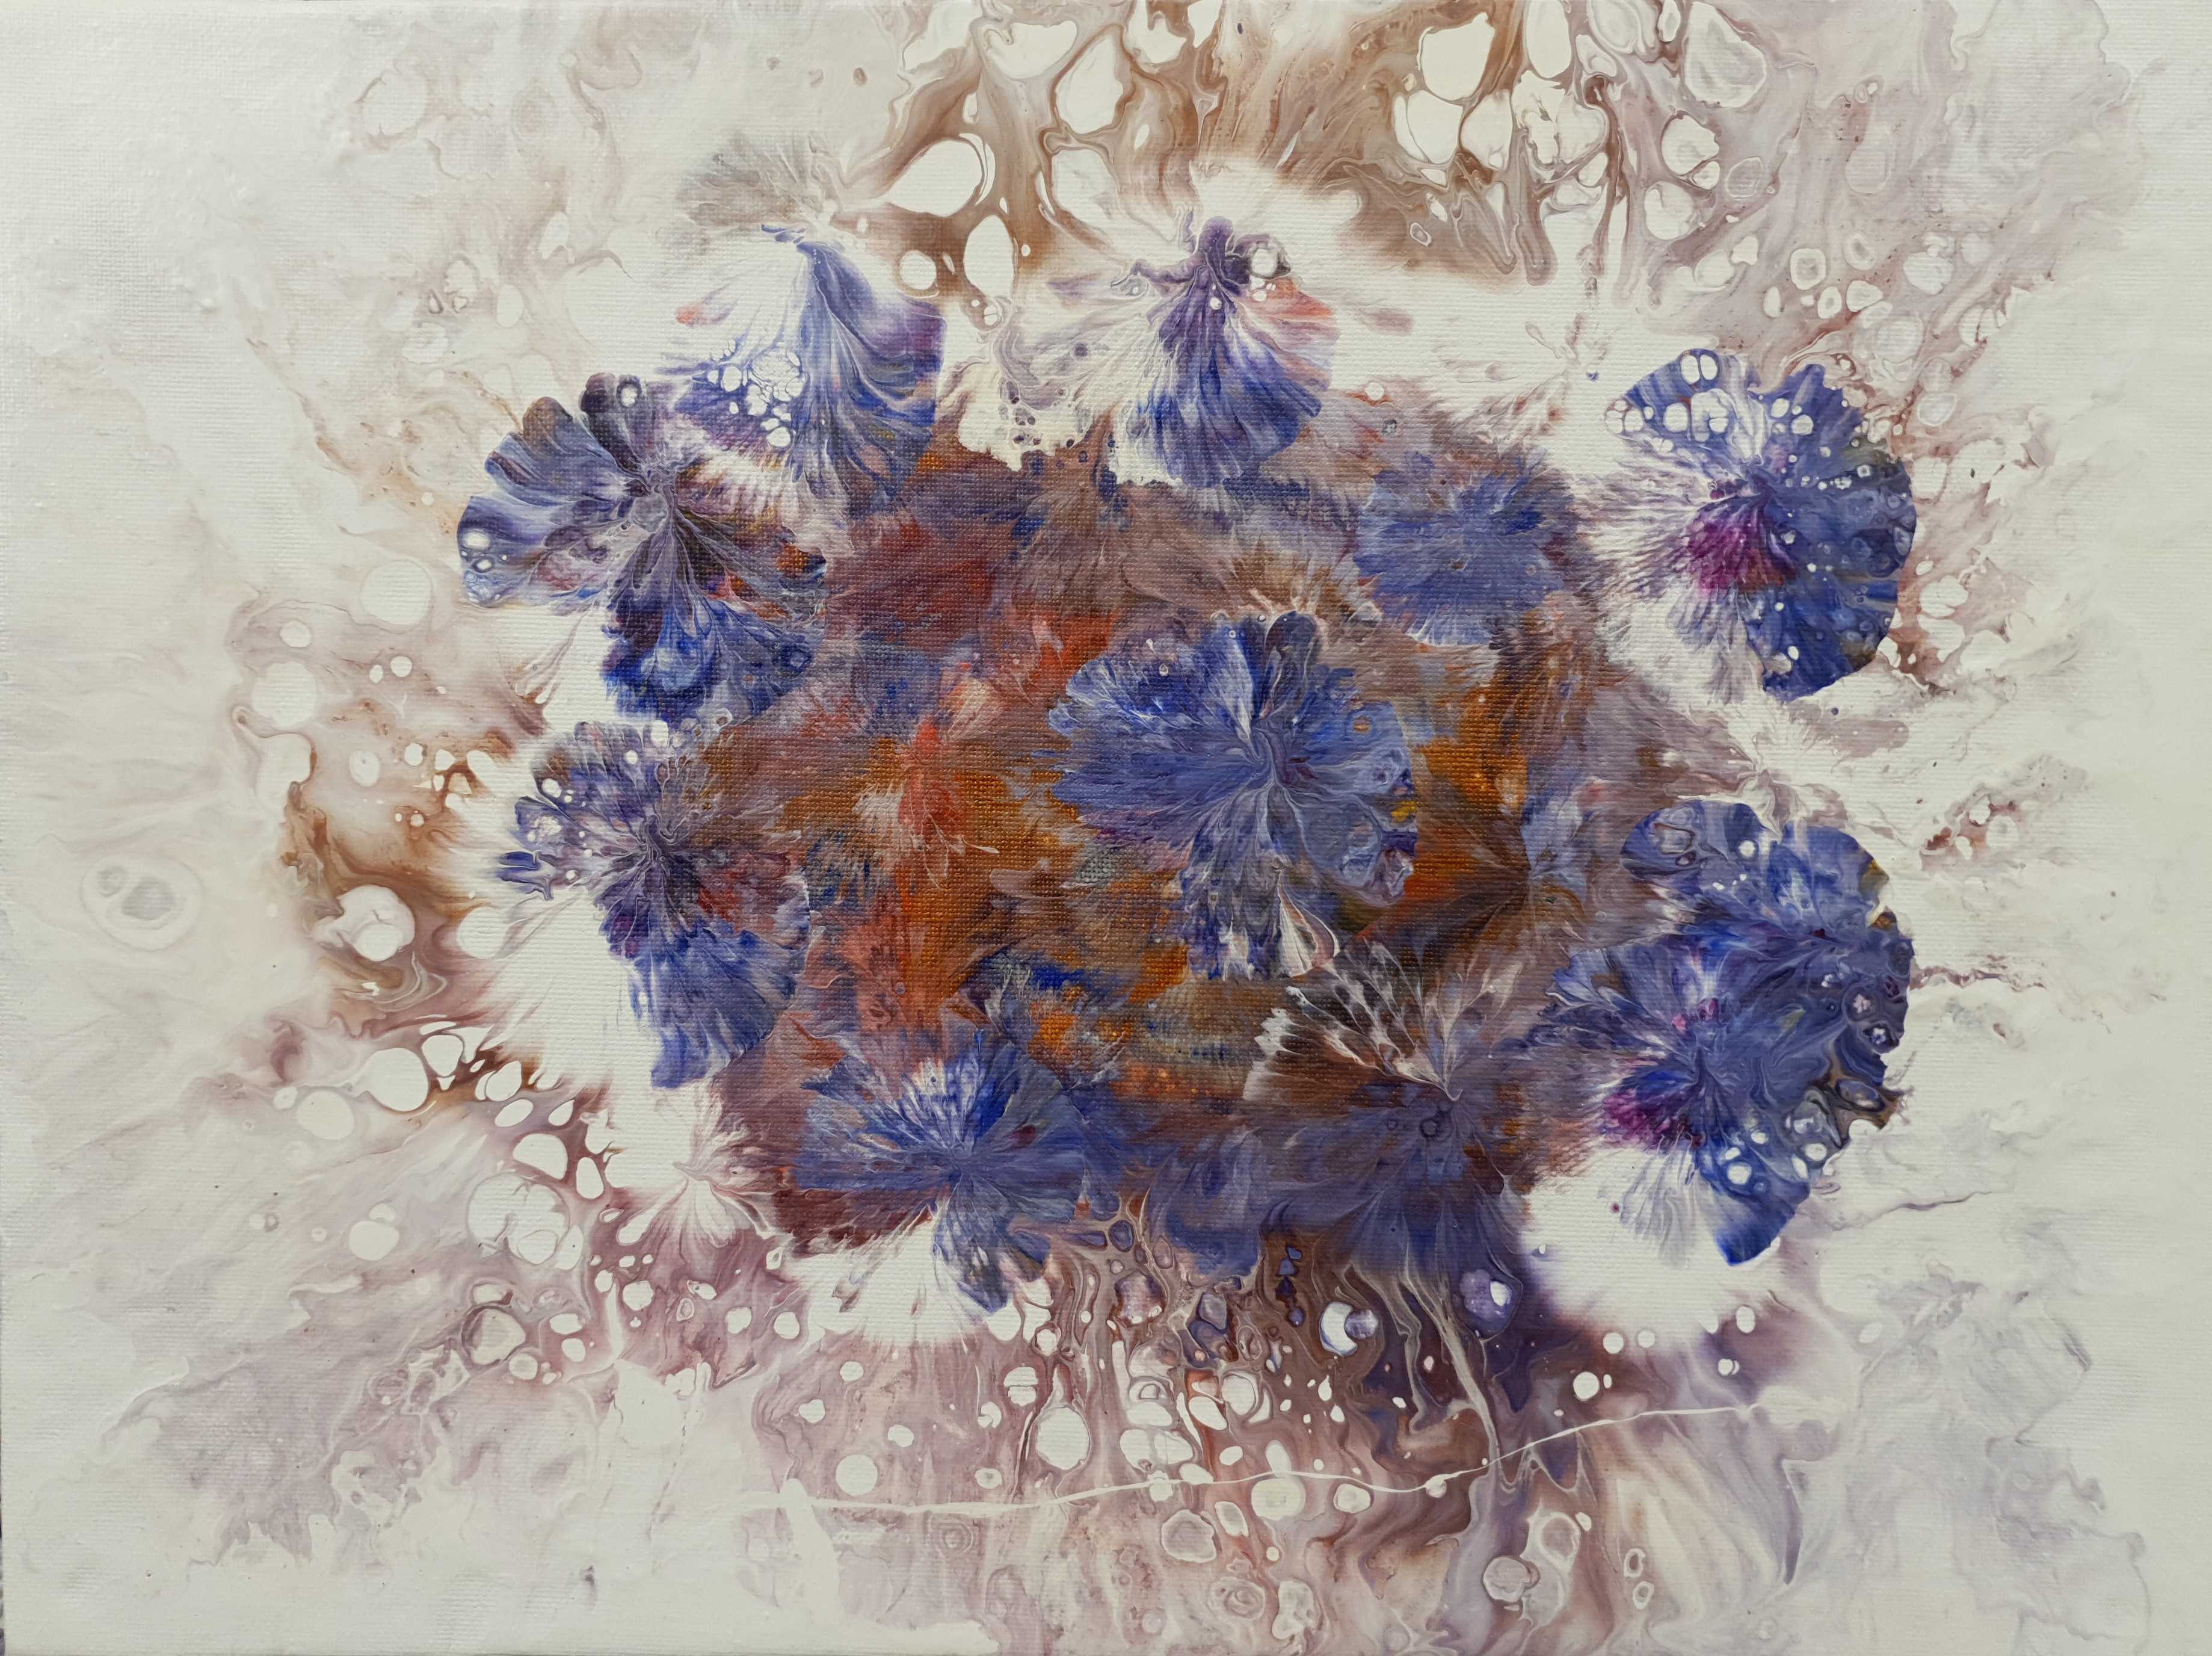 Abstract artwork depicting a posy of violets